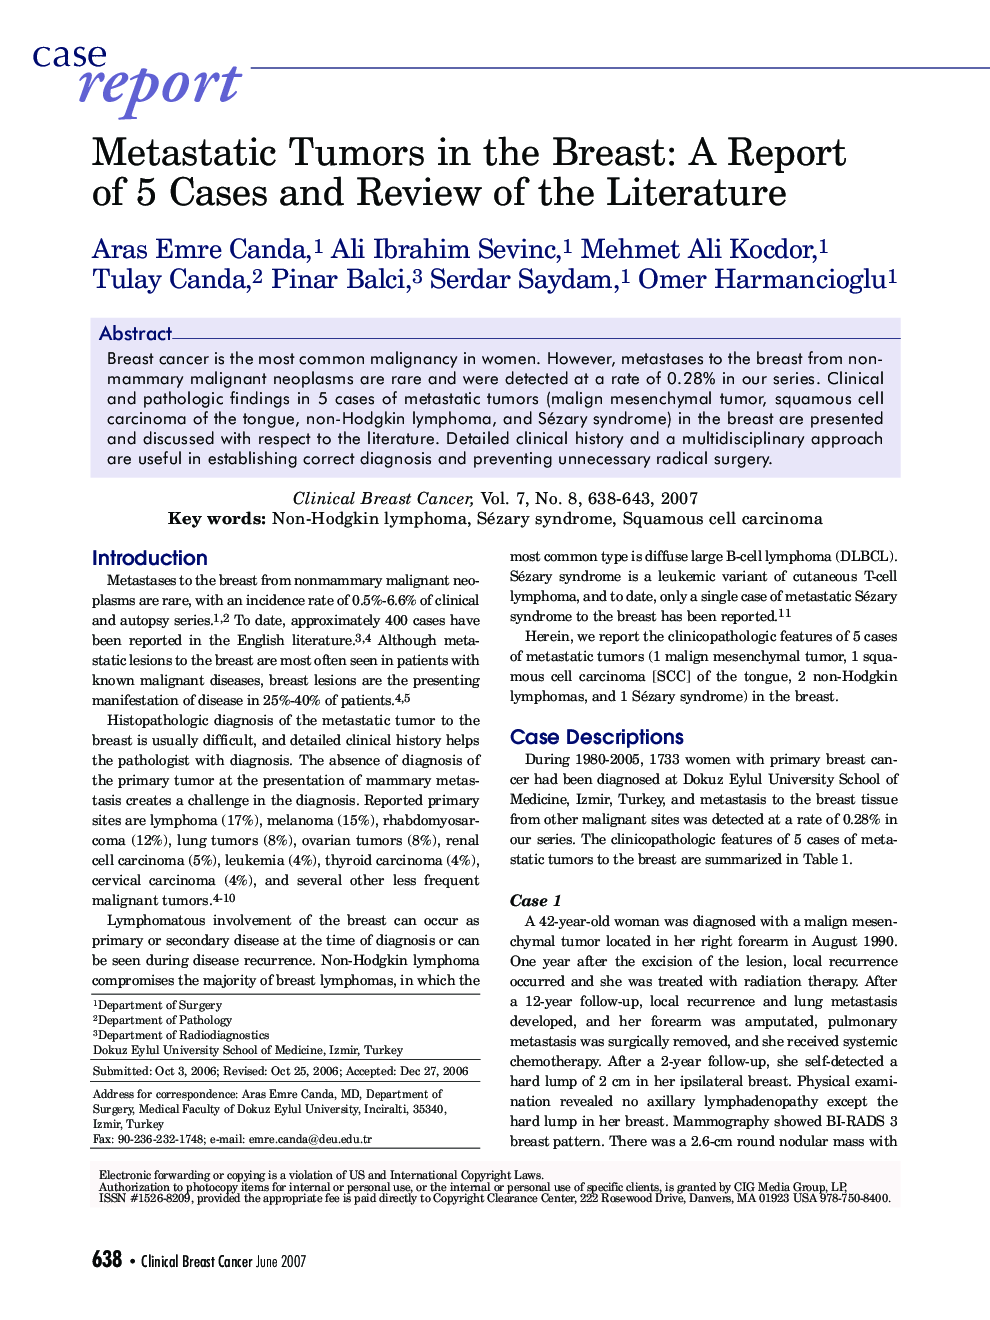 Metastatic Tumors in the Breast: A Report of 5 Cases and Review of the Literature 